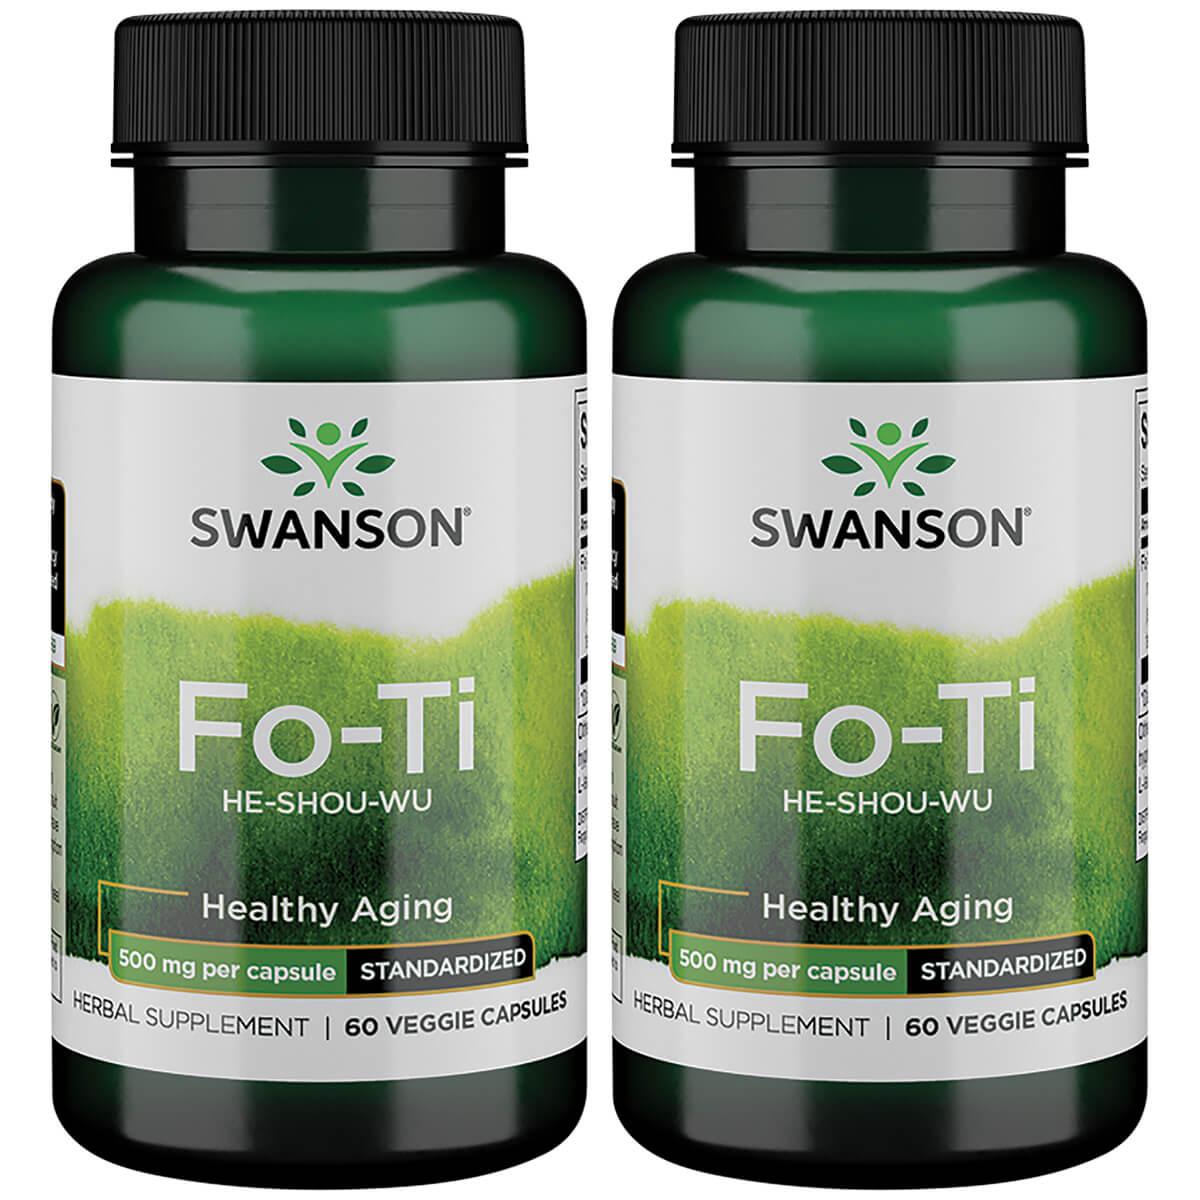 Swanson Superior Herbs Fo-Ti Extract He-Shou-Wu 2 Pack Vitamin 500 mg 60 Veg Caps Herbs and Supplements